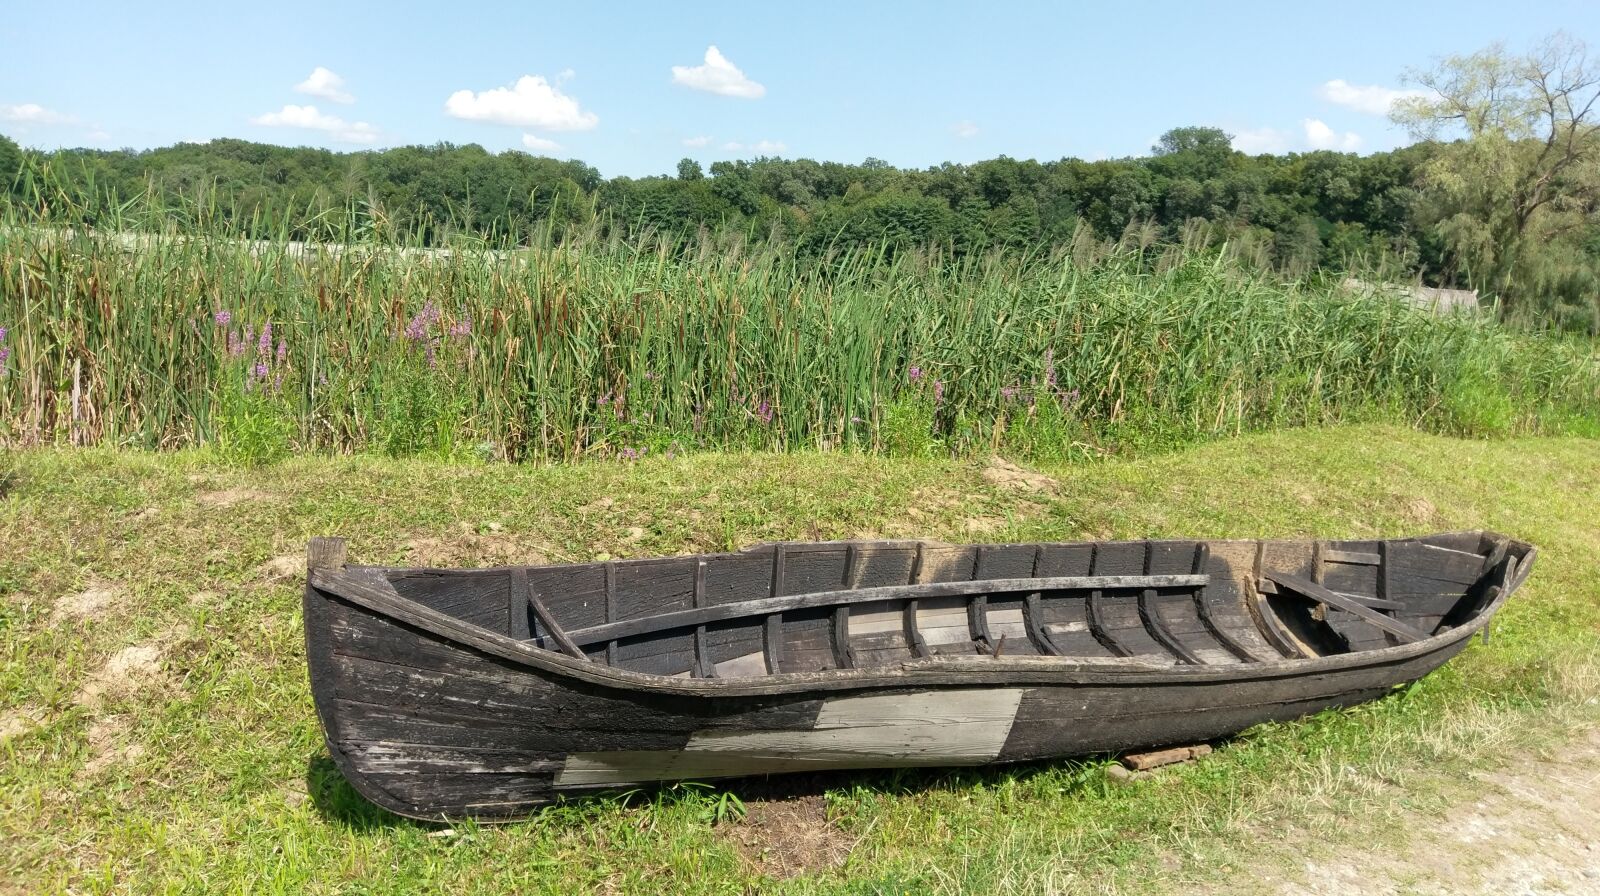 HTC 10 sample photo. Wreck, boat, grass photography